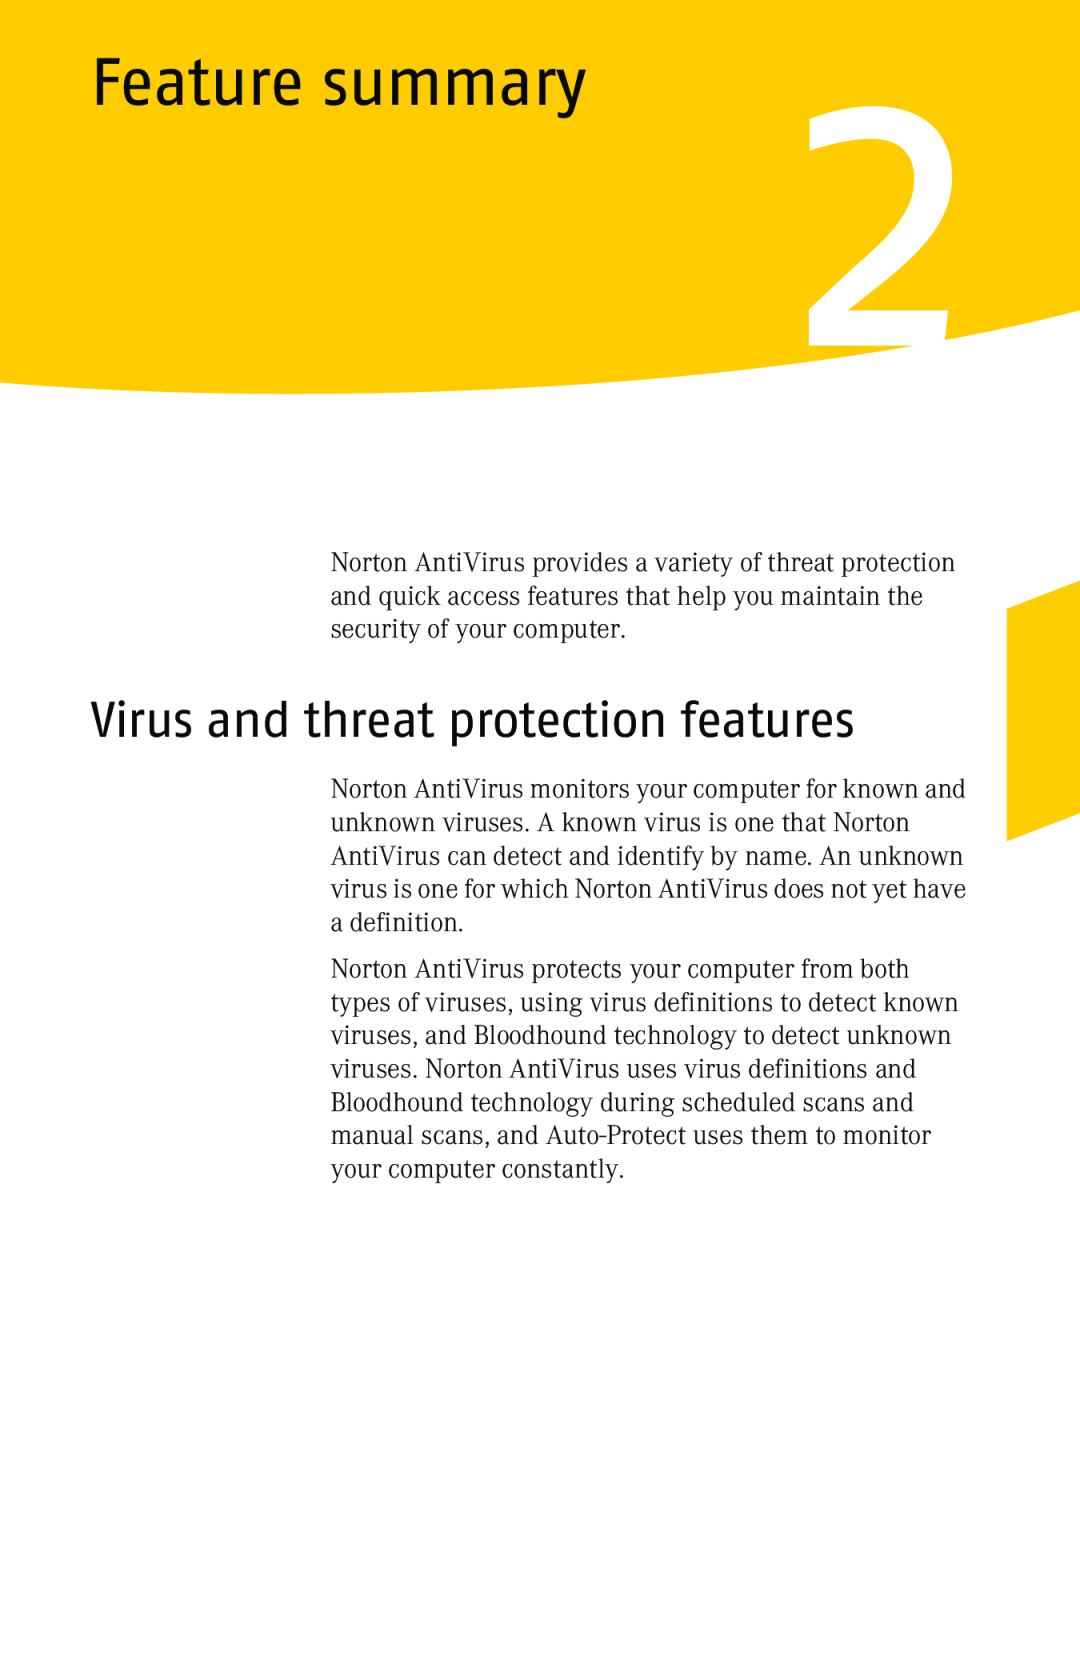 Symantec 10 manual Feature summary, Virus and threat protection features 